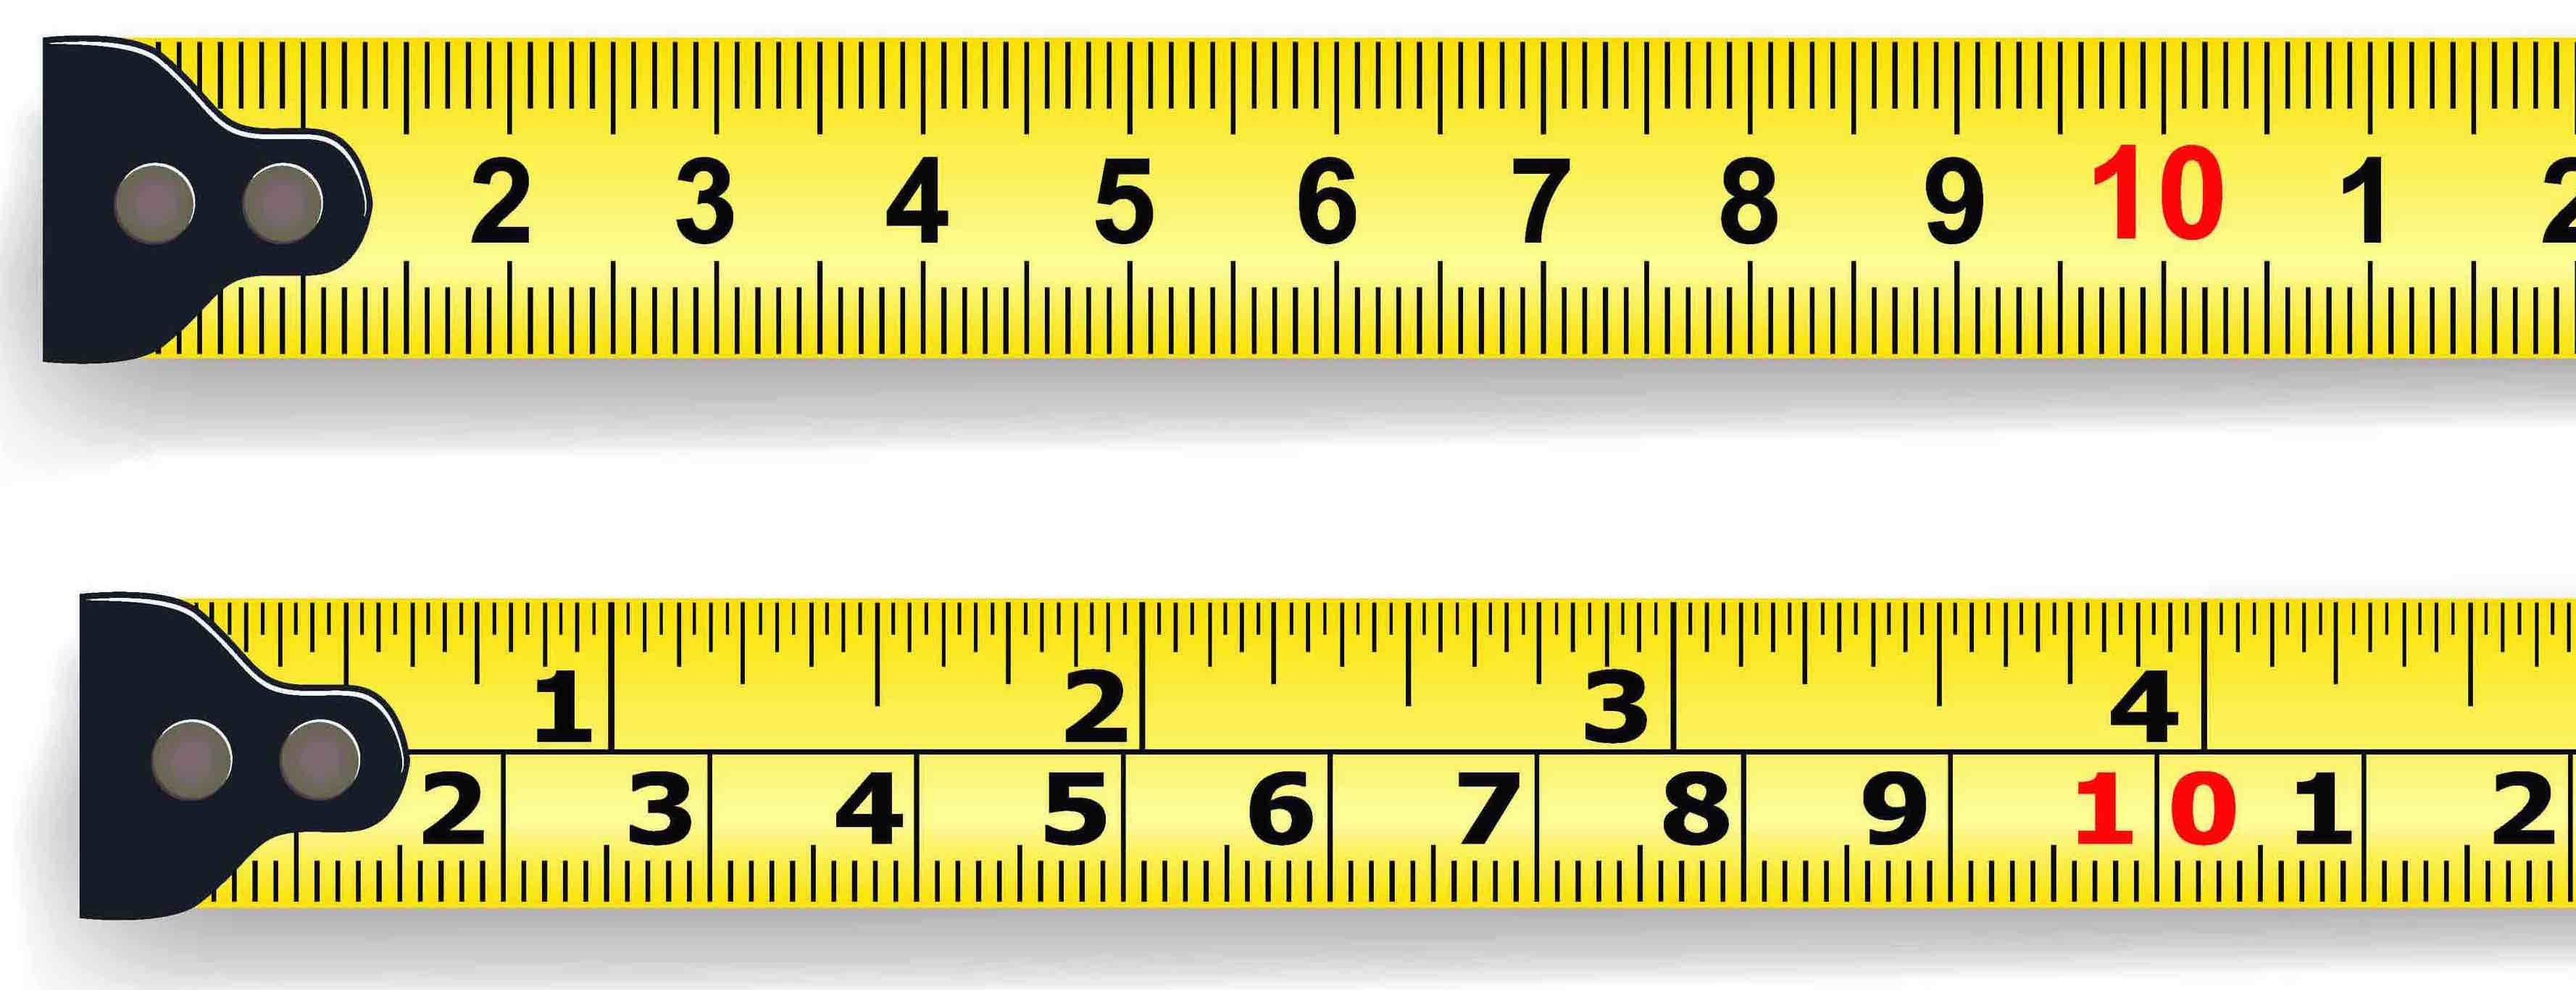 9.5 Cm To Inches / 21 Inches To Centimeters Converter 21 in To cm.